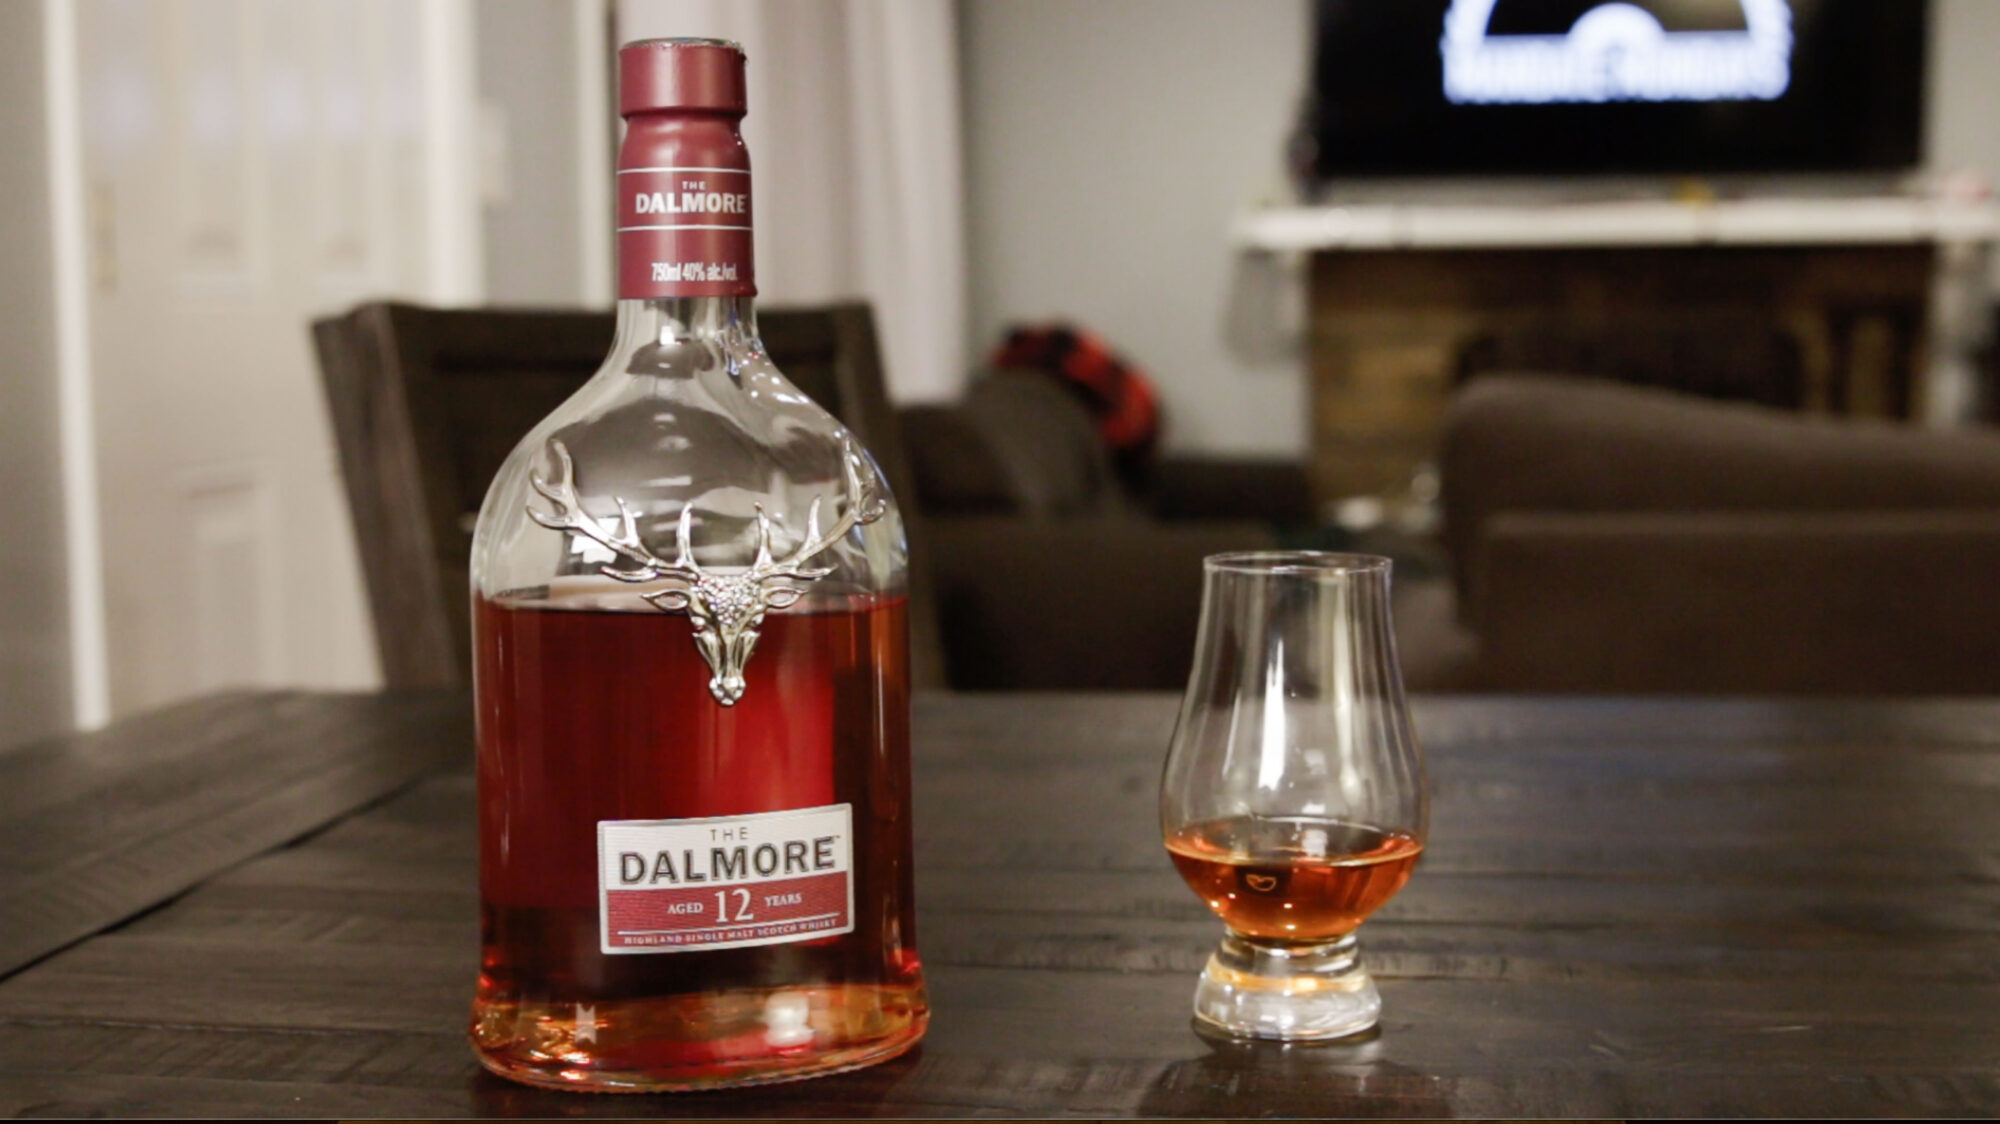 The Dalmore Whisky bottle and glass